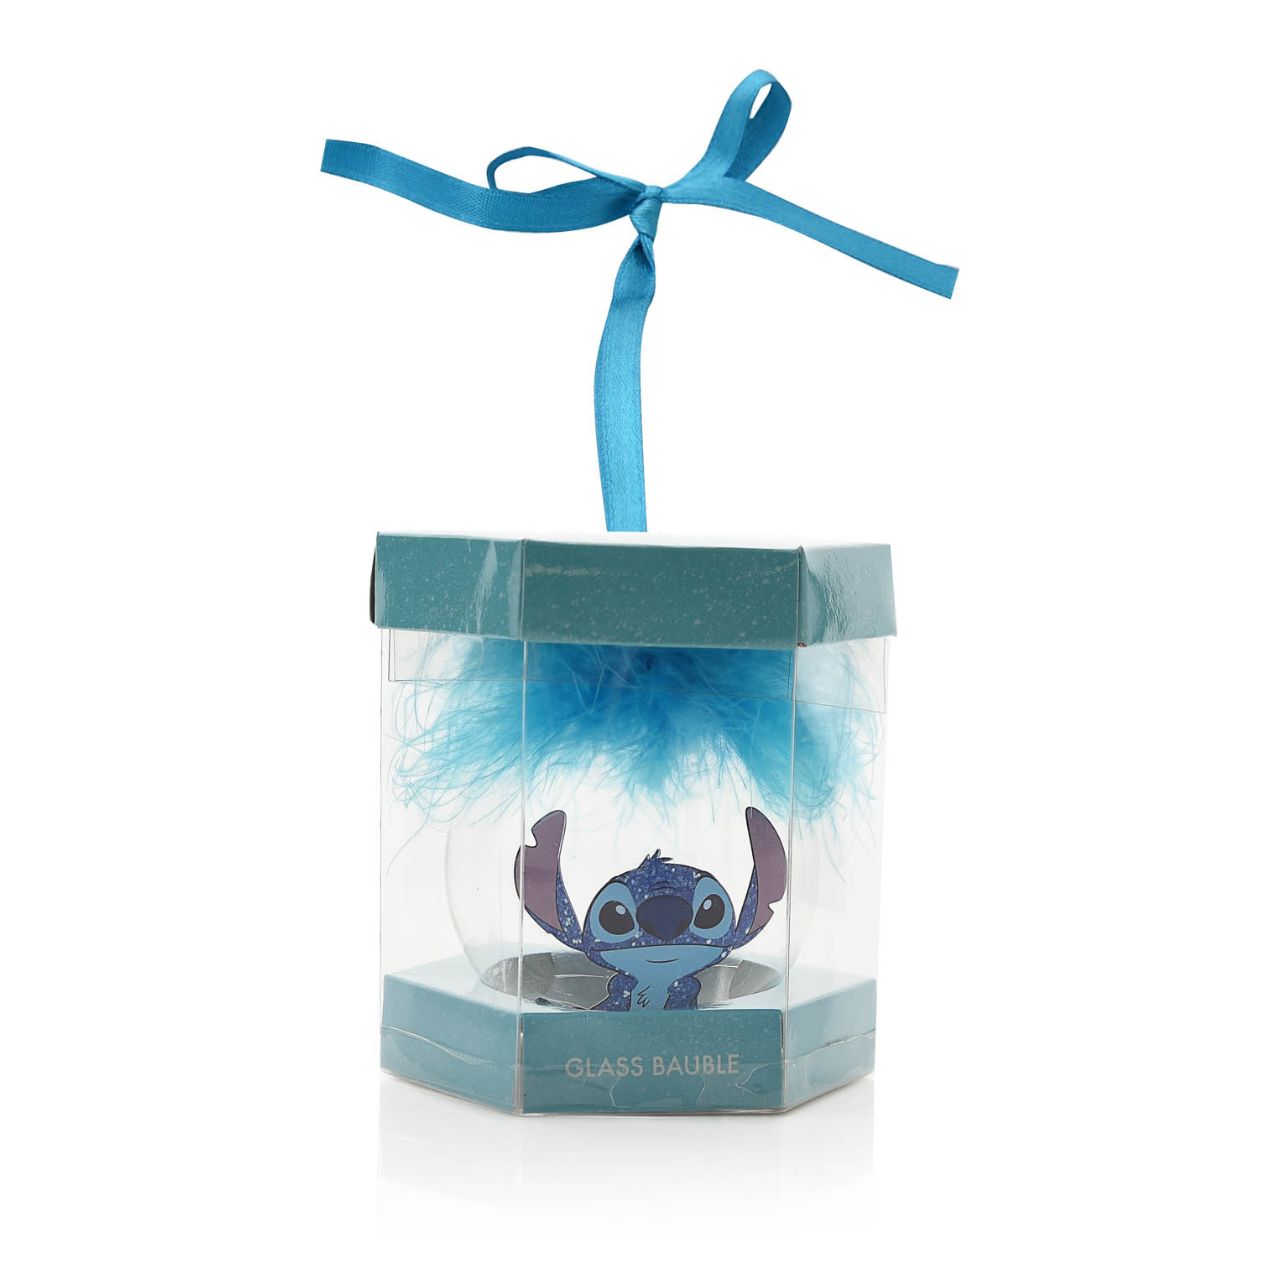 Disney Stitch Feather Christmas Bauble  Say Aloha to Christmas this year with this Stitch themed Disney Glass bauble, ideal for any little Lilo and Stitch enthusiasts in your life.